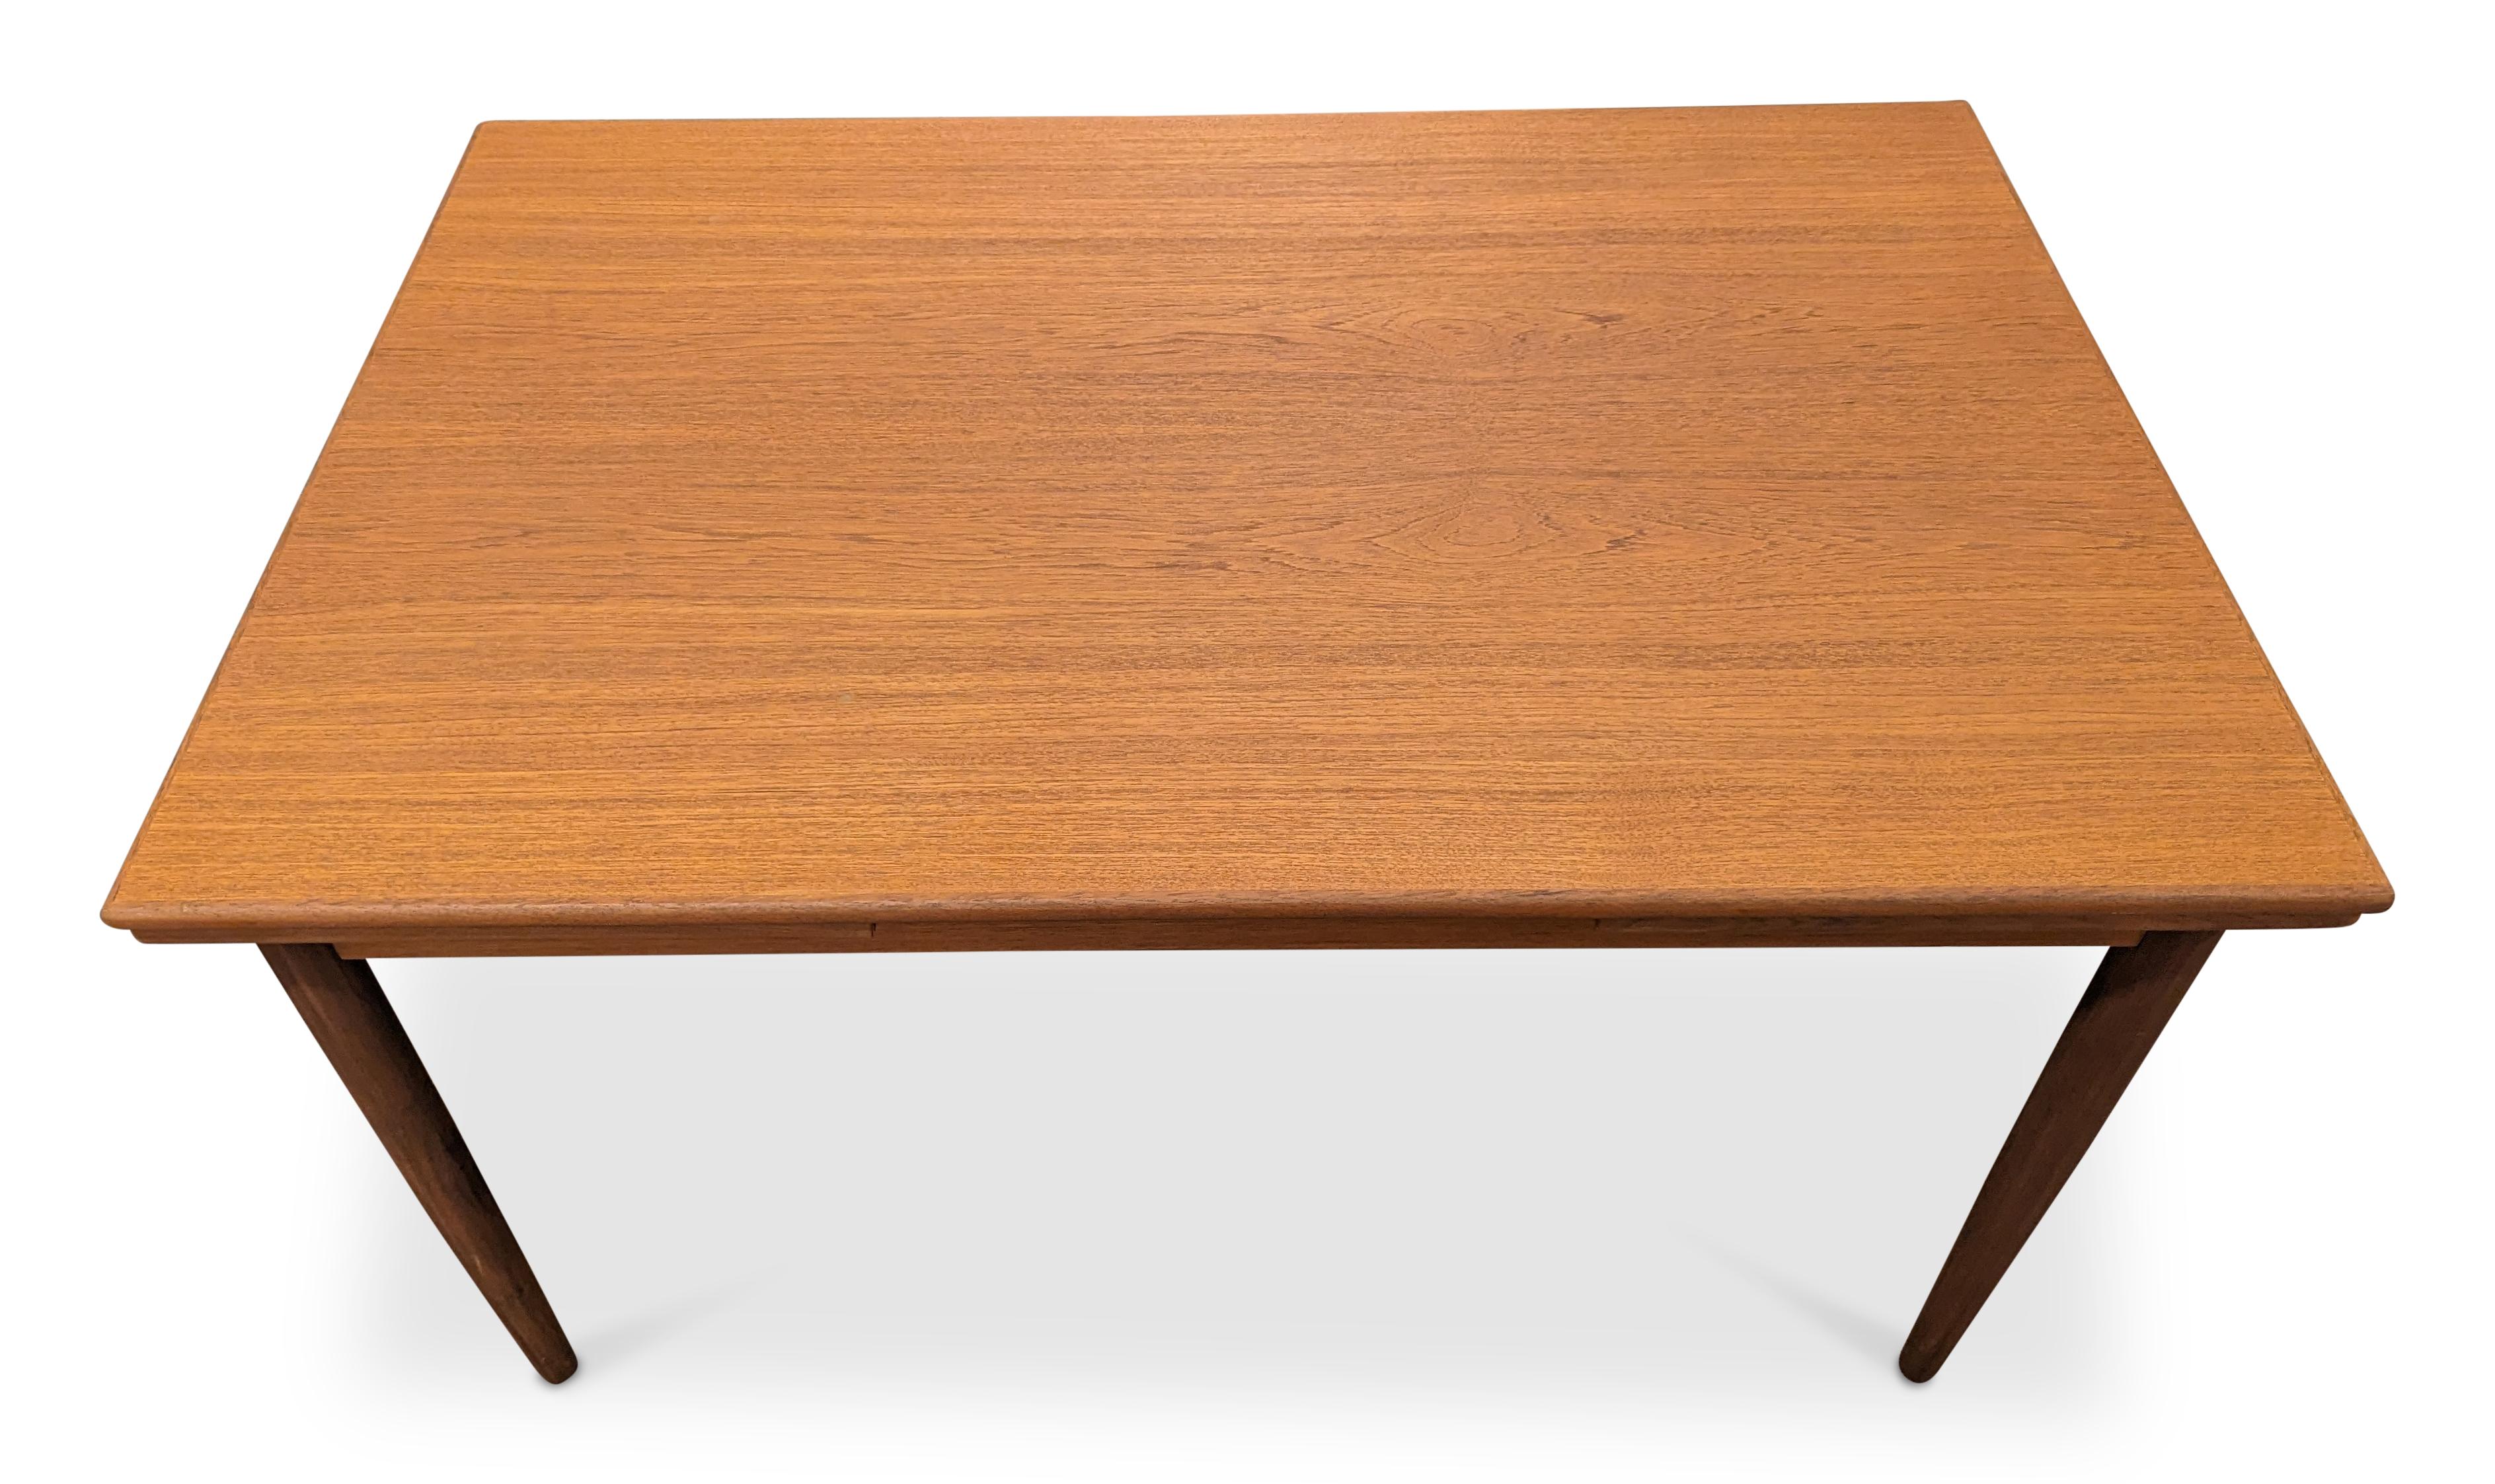 Mid-20th Century Teak Dining Table w Two Hidden Leaves - 022428 Vintage Danish Modern For Sale